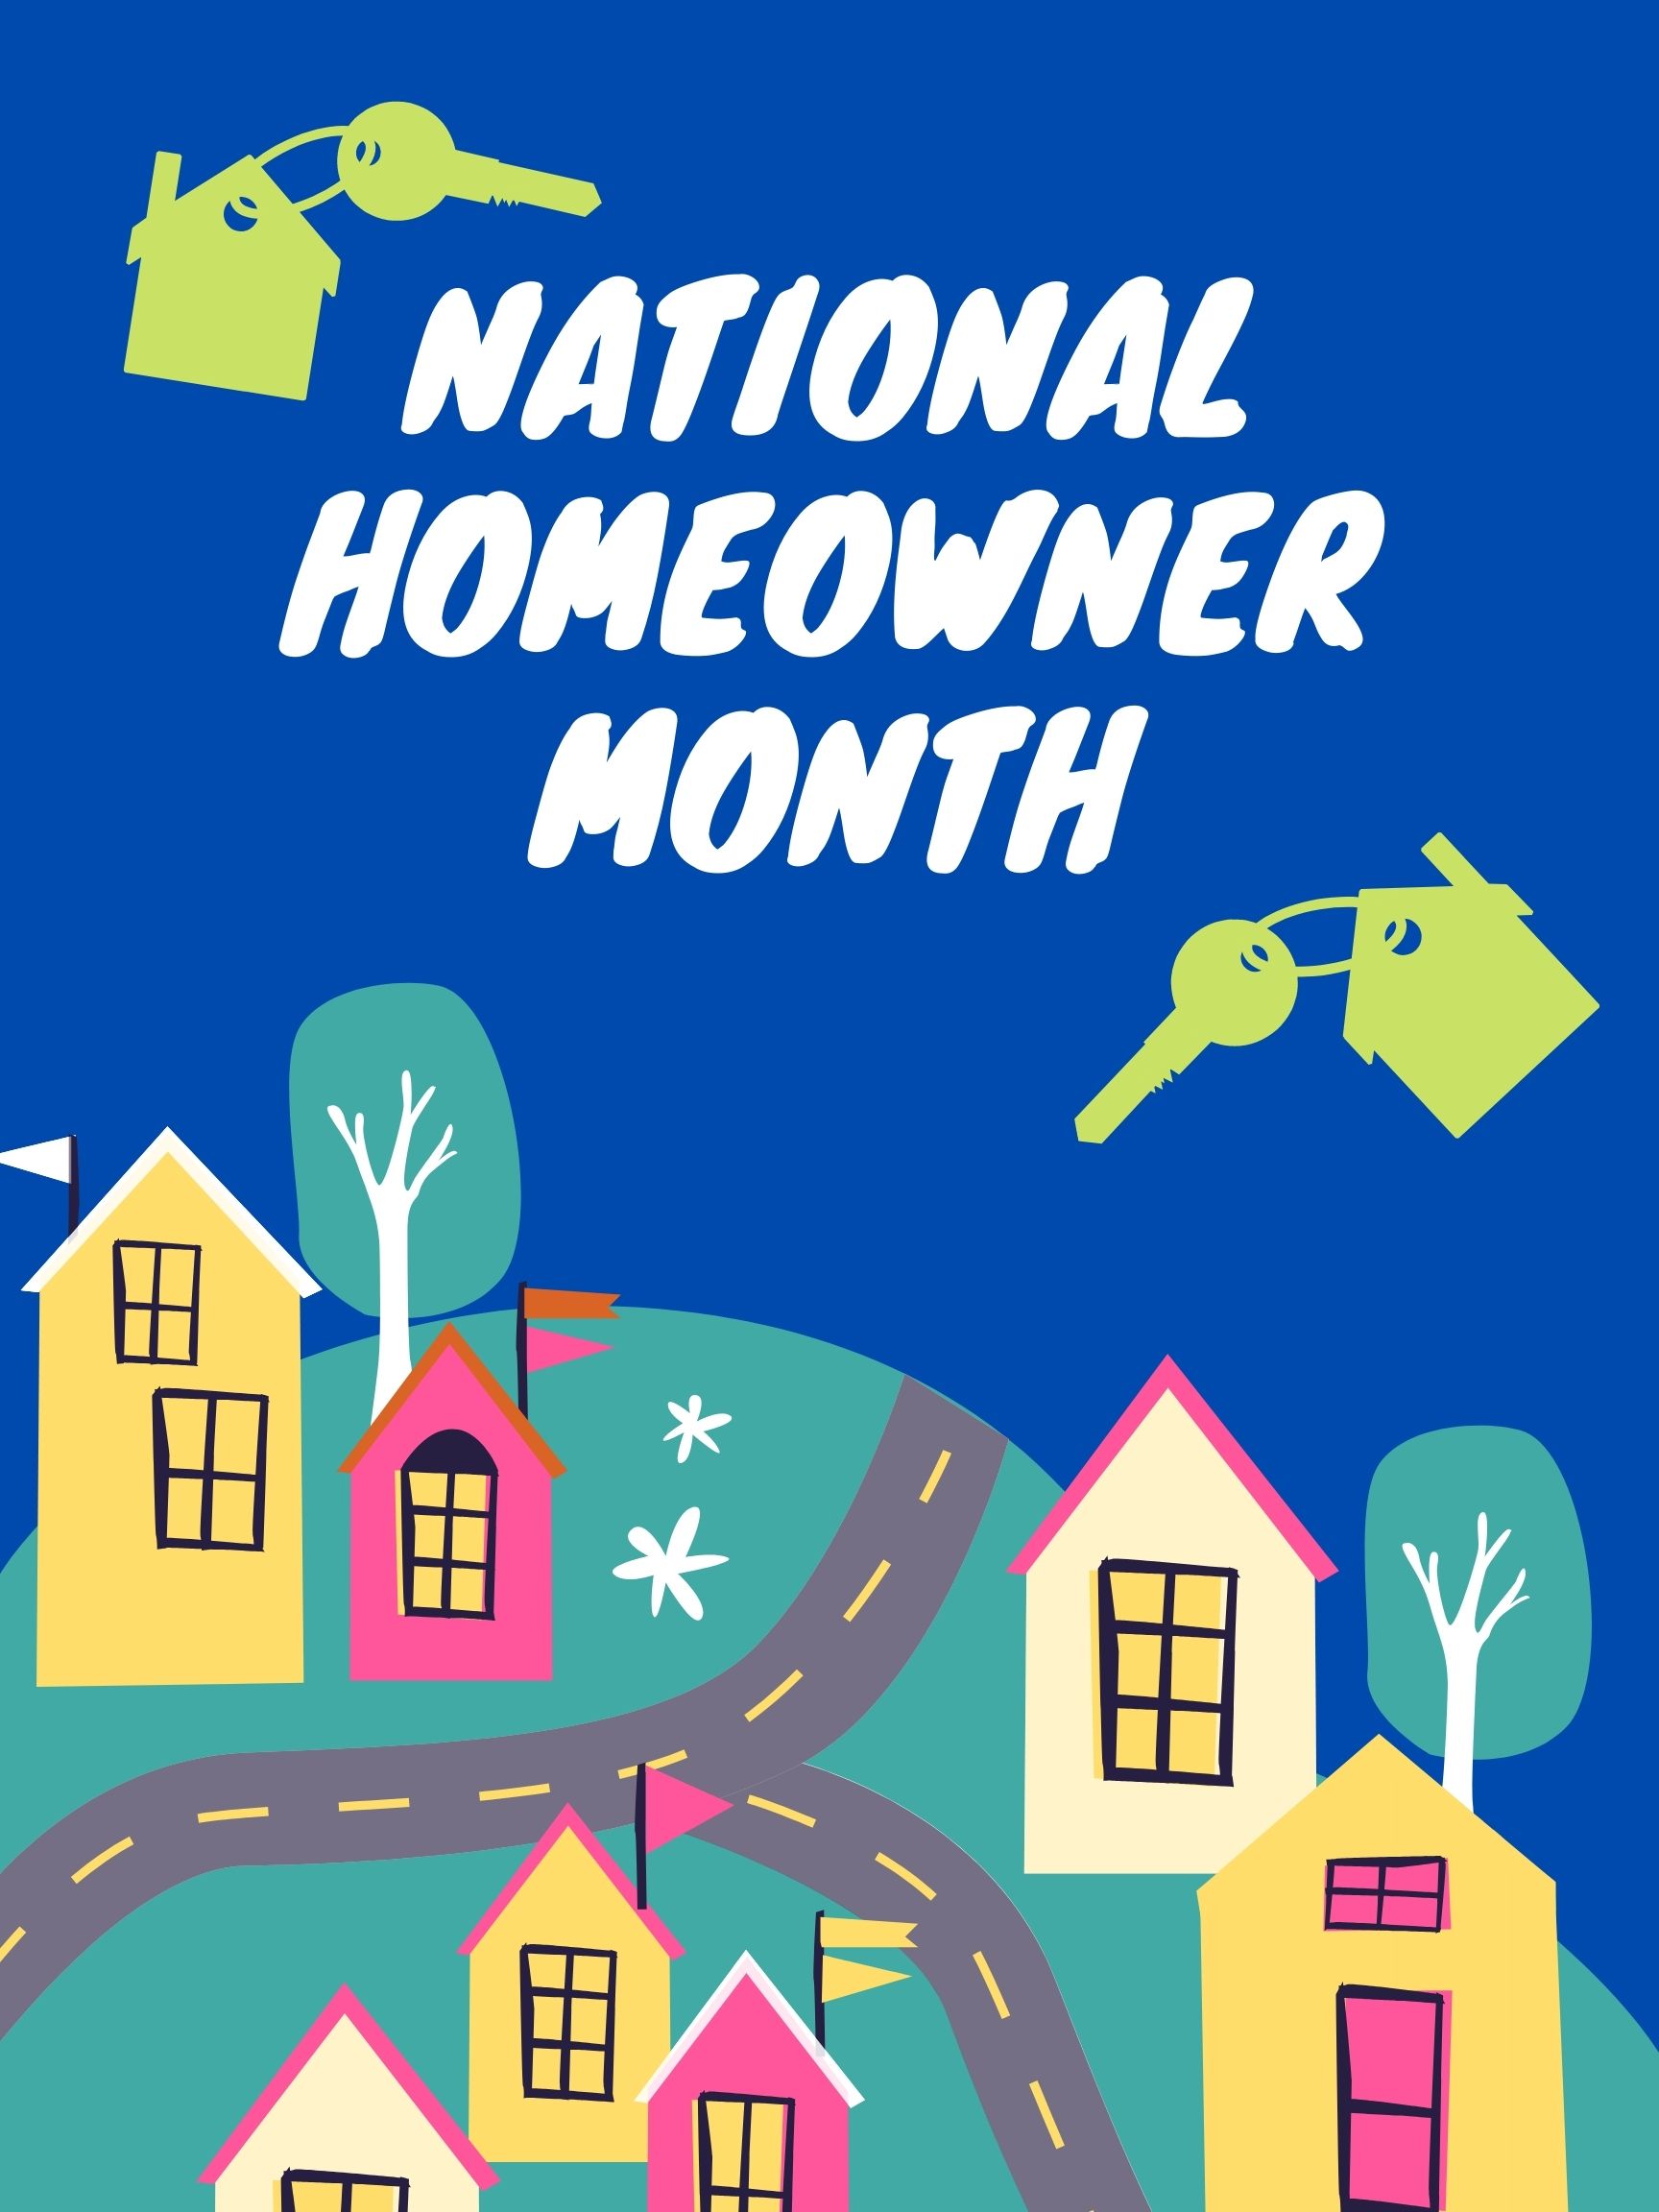 It's Home Ownership Month! Greater Baton Rouge Association of REALTORS®